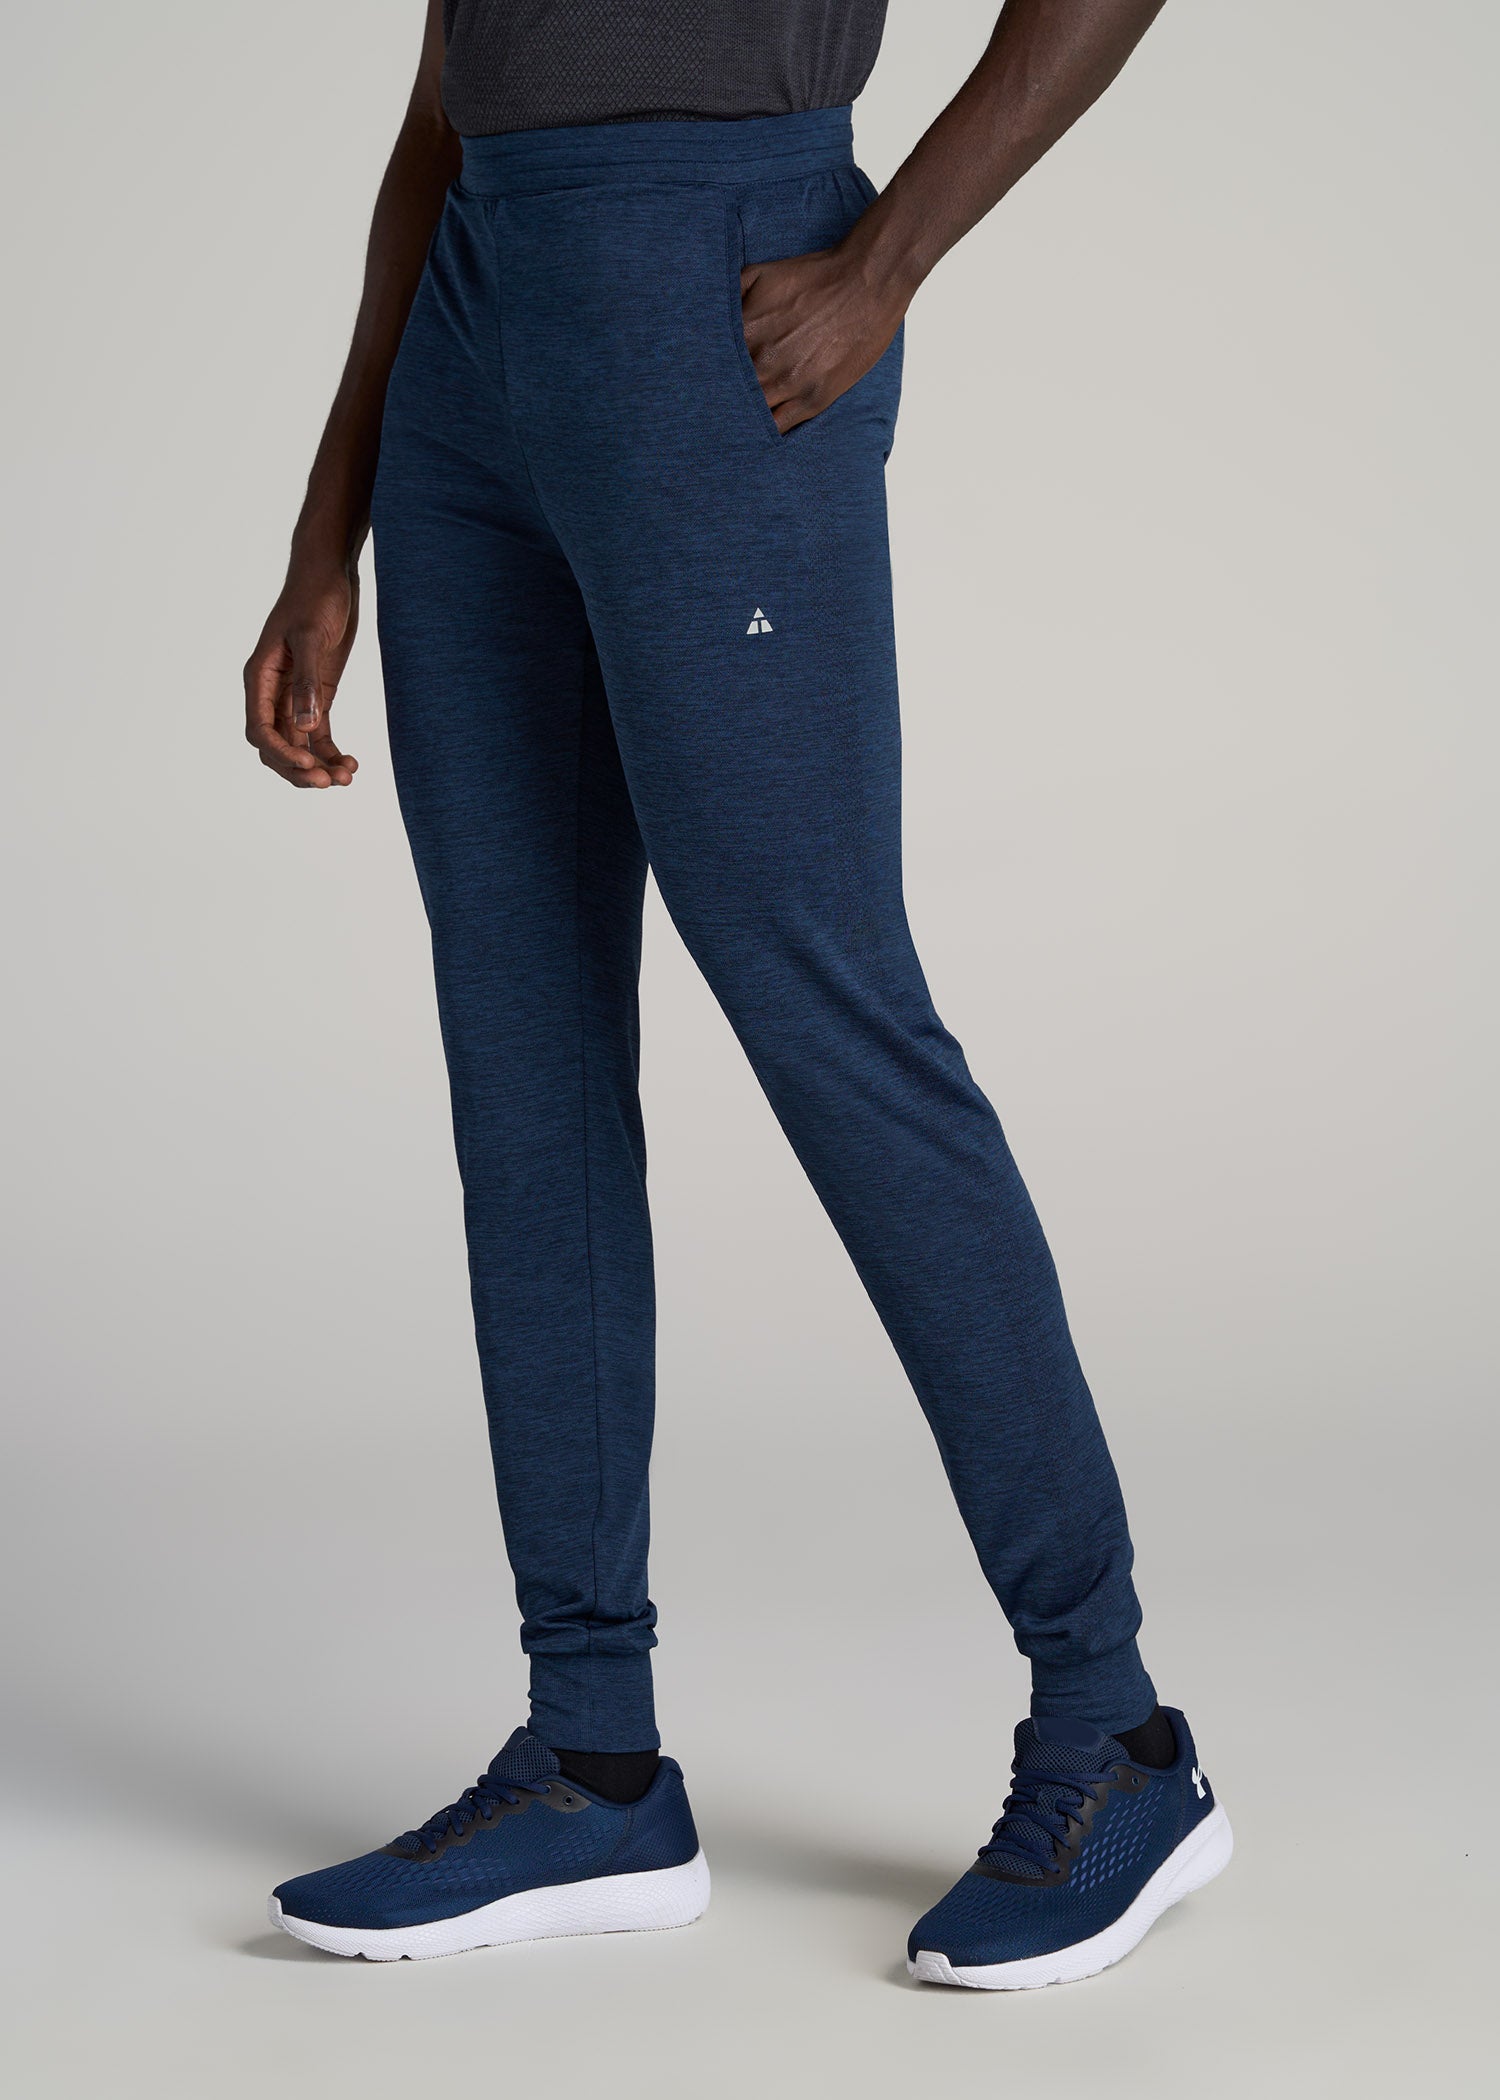 Steady State Jogger *Tall, Men's Joggers